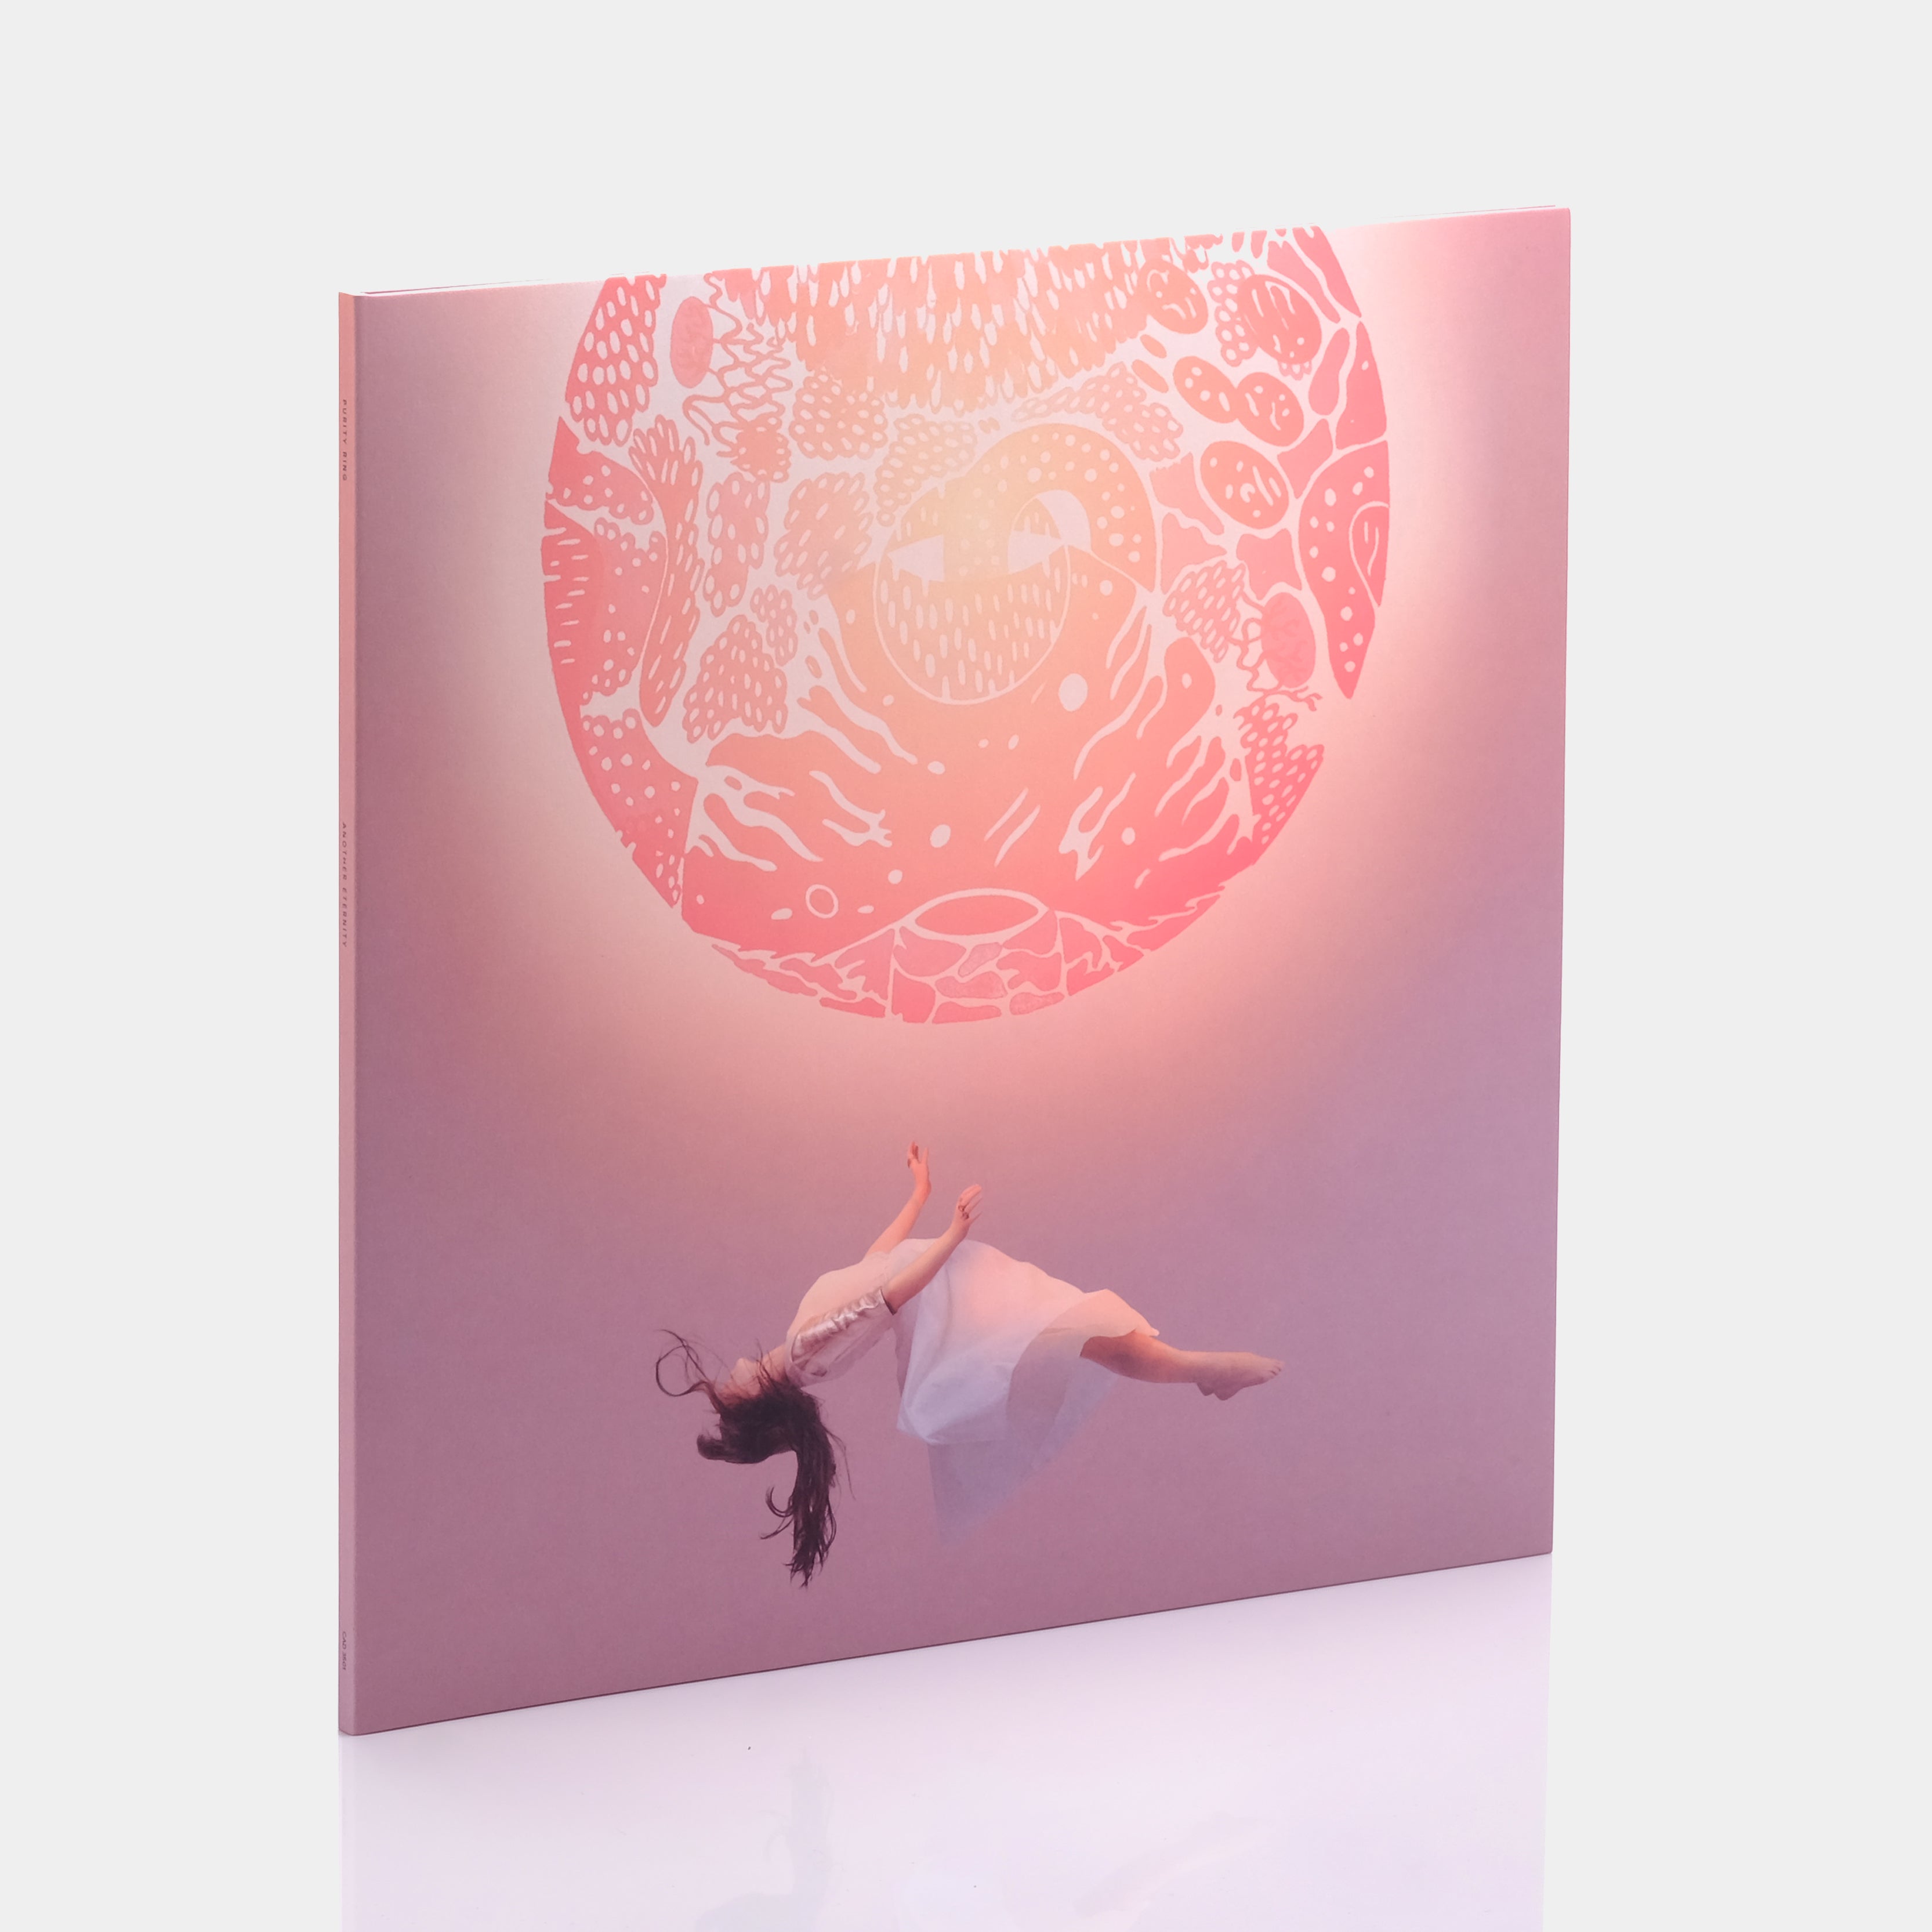 Purity Ring - Another Eternity LP Vinyl Record